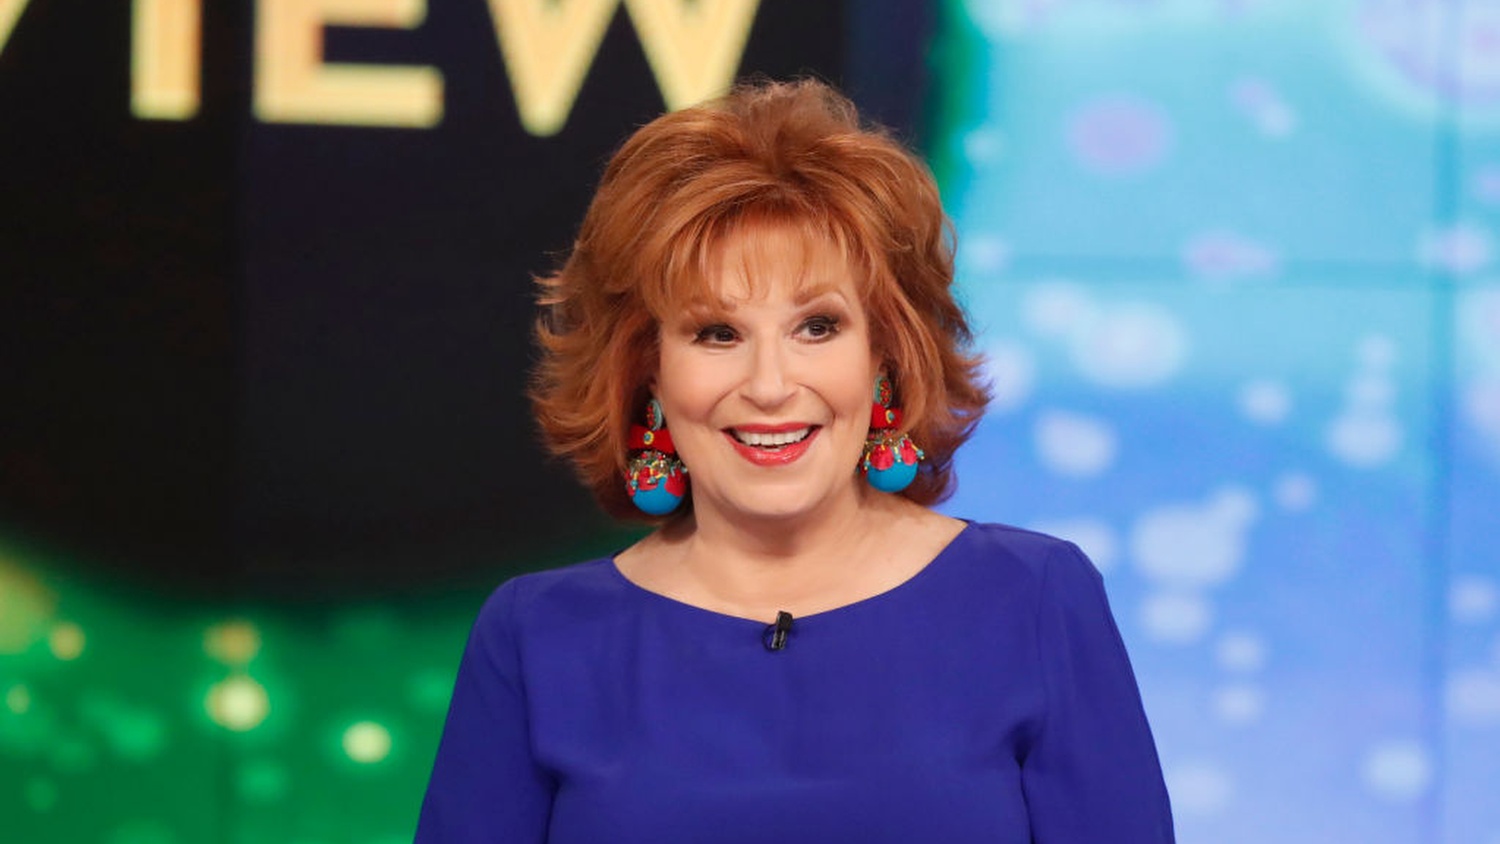 Joy Behar On COVID-19 Vaccine Hesitation In Black Community: 'The Experiment Has Been Done On White People Now'